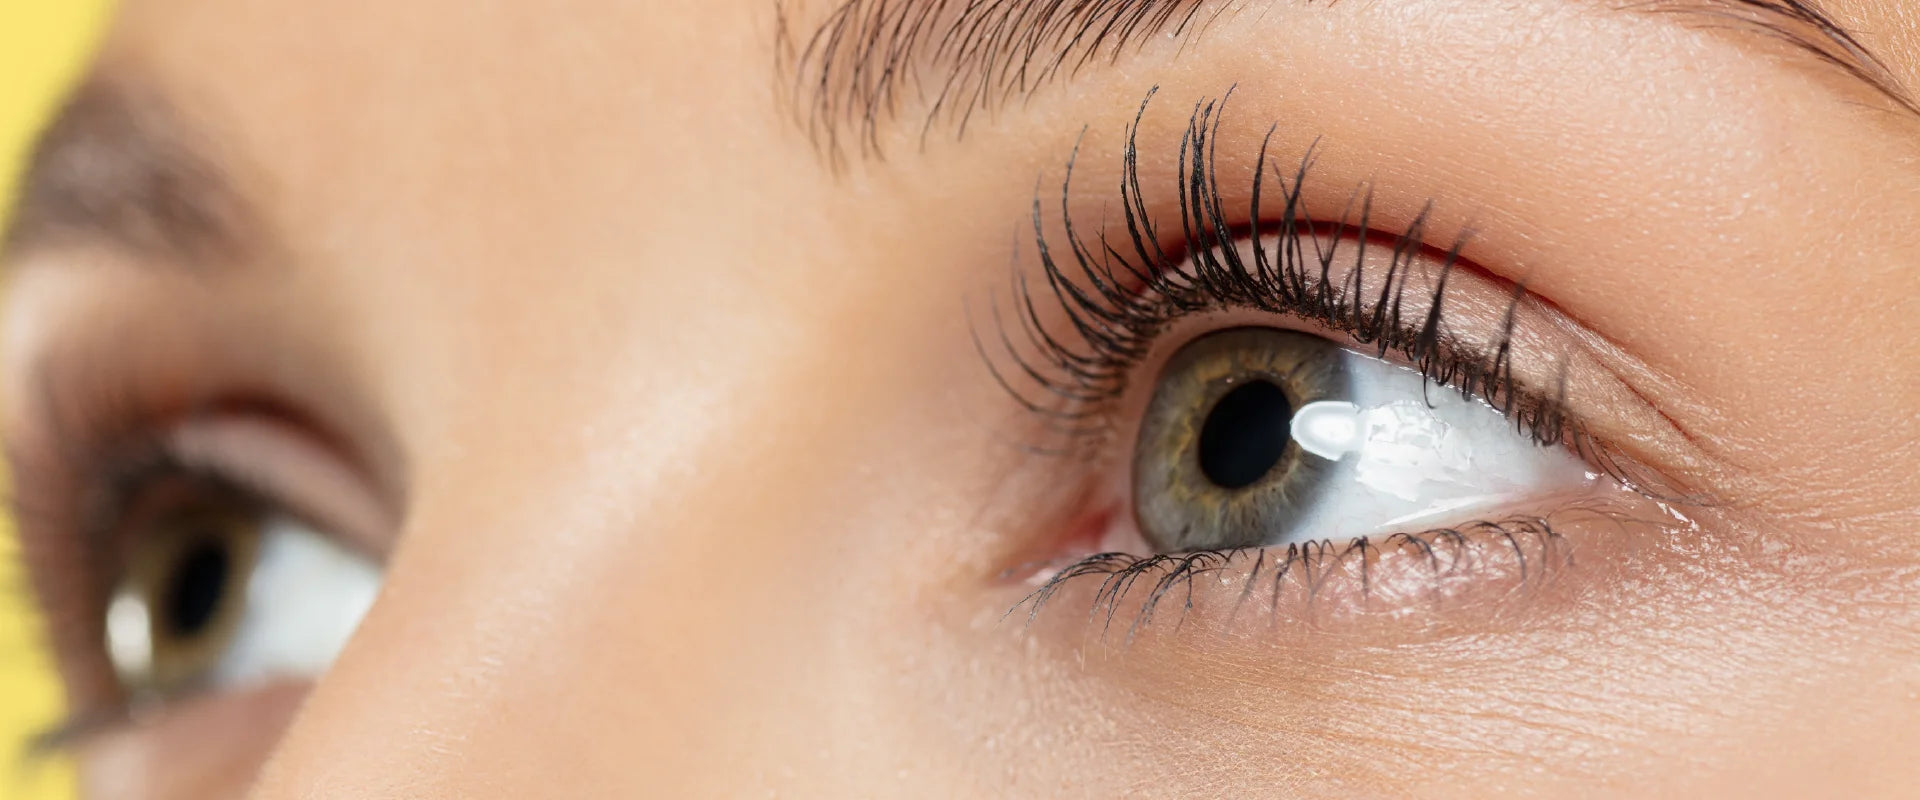 Tips for Eye flu treatment at home